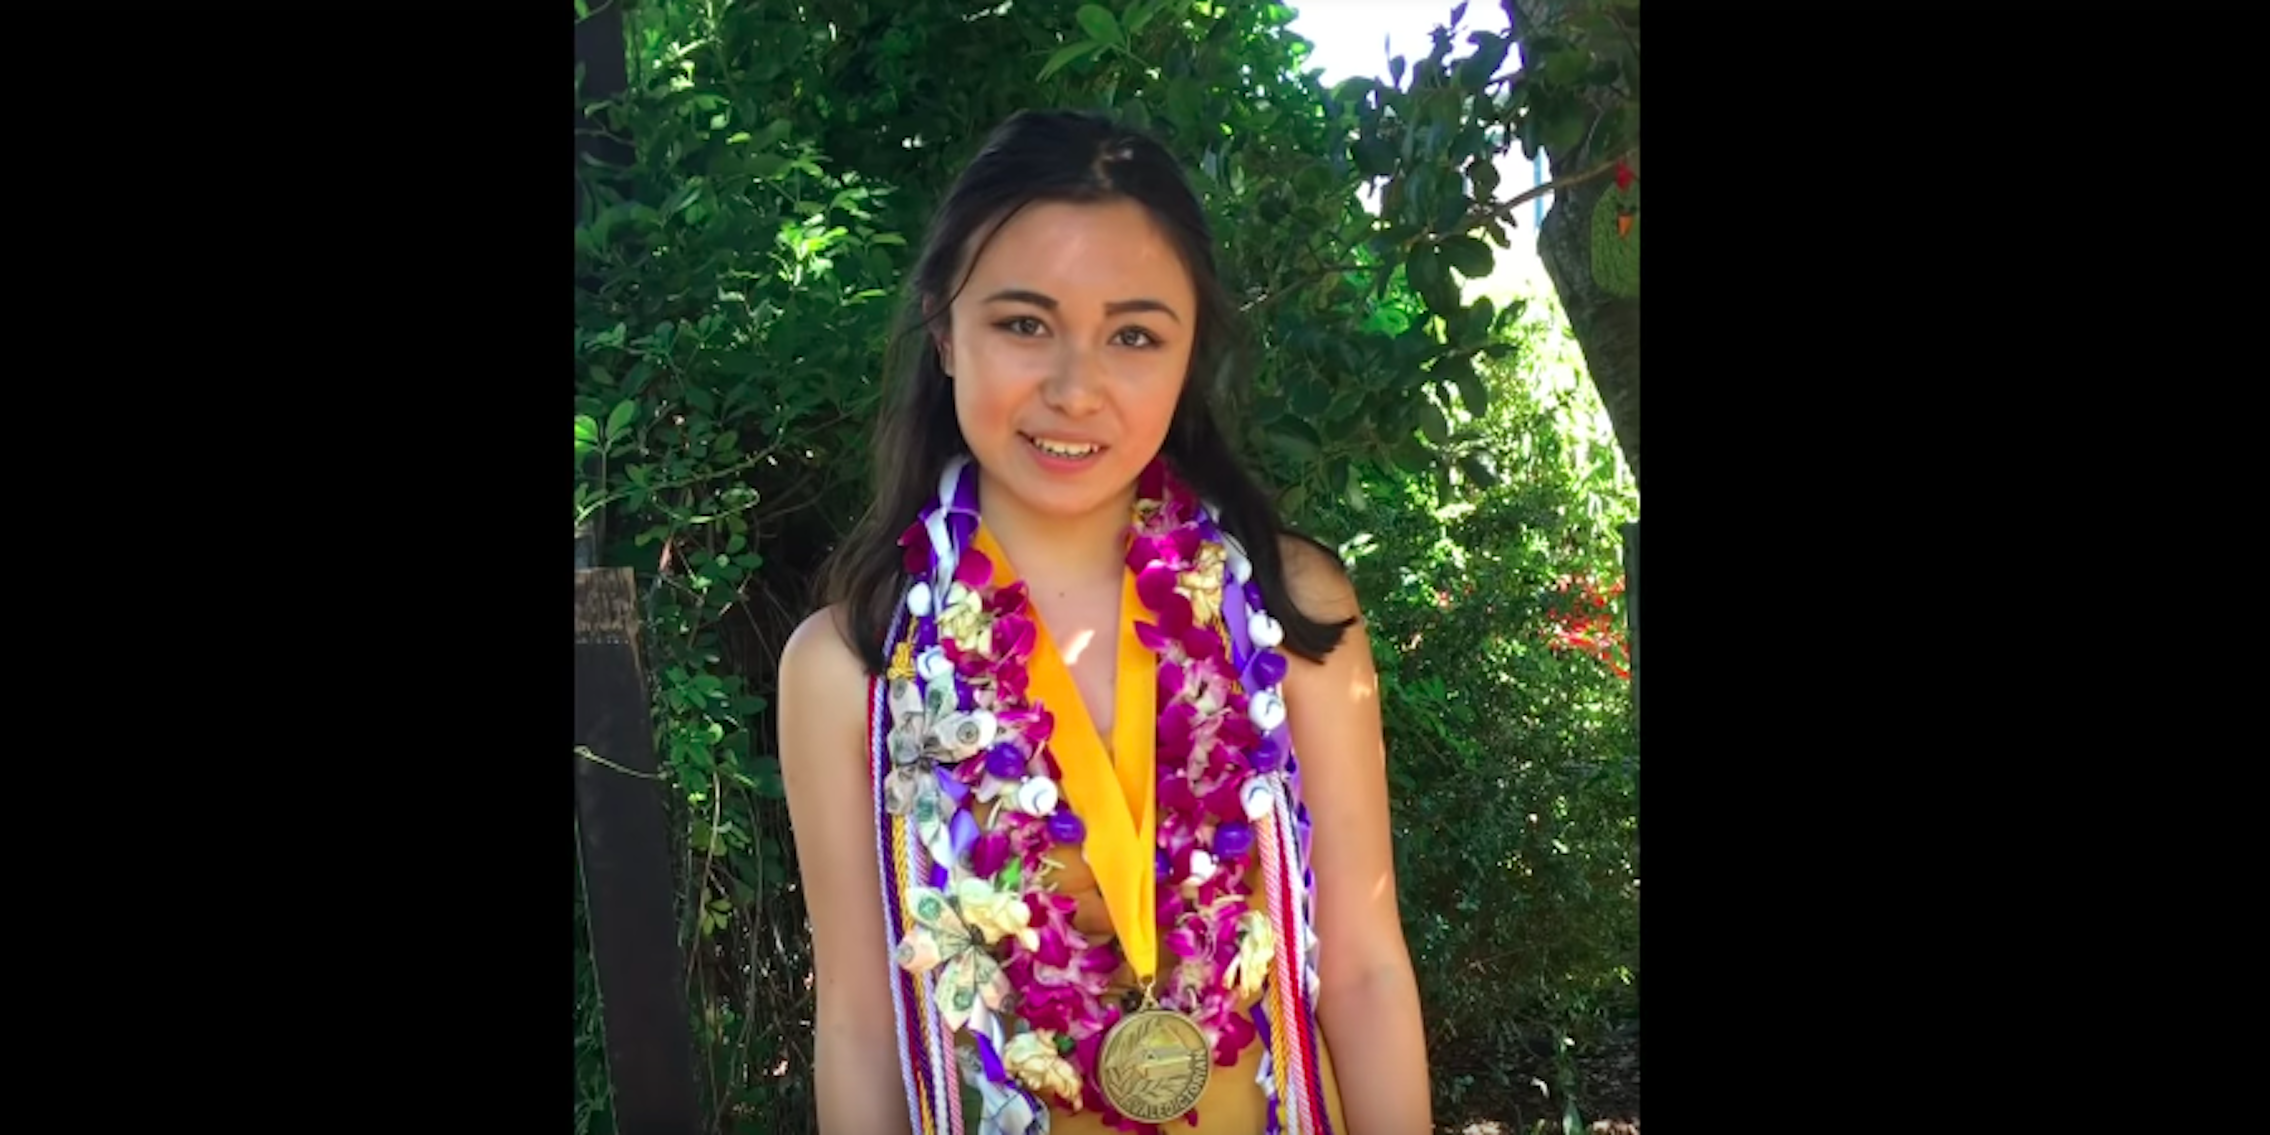 High School Valedictorian Gets Microphone Shut Off When She Discusses